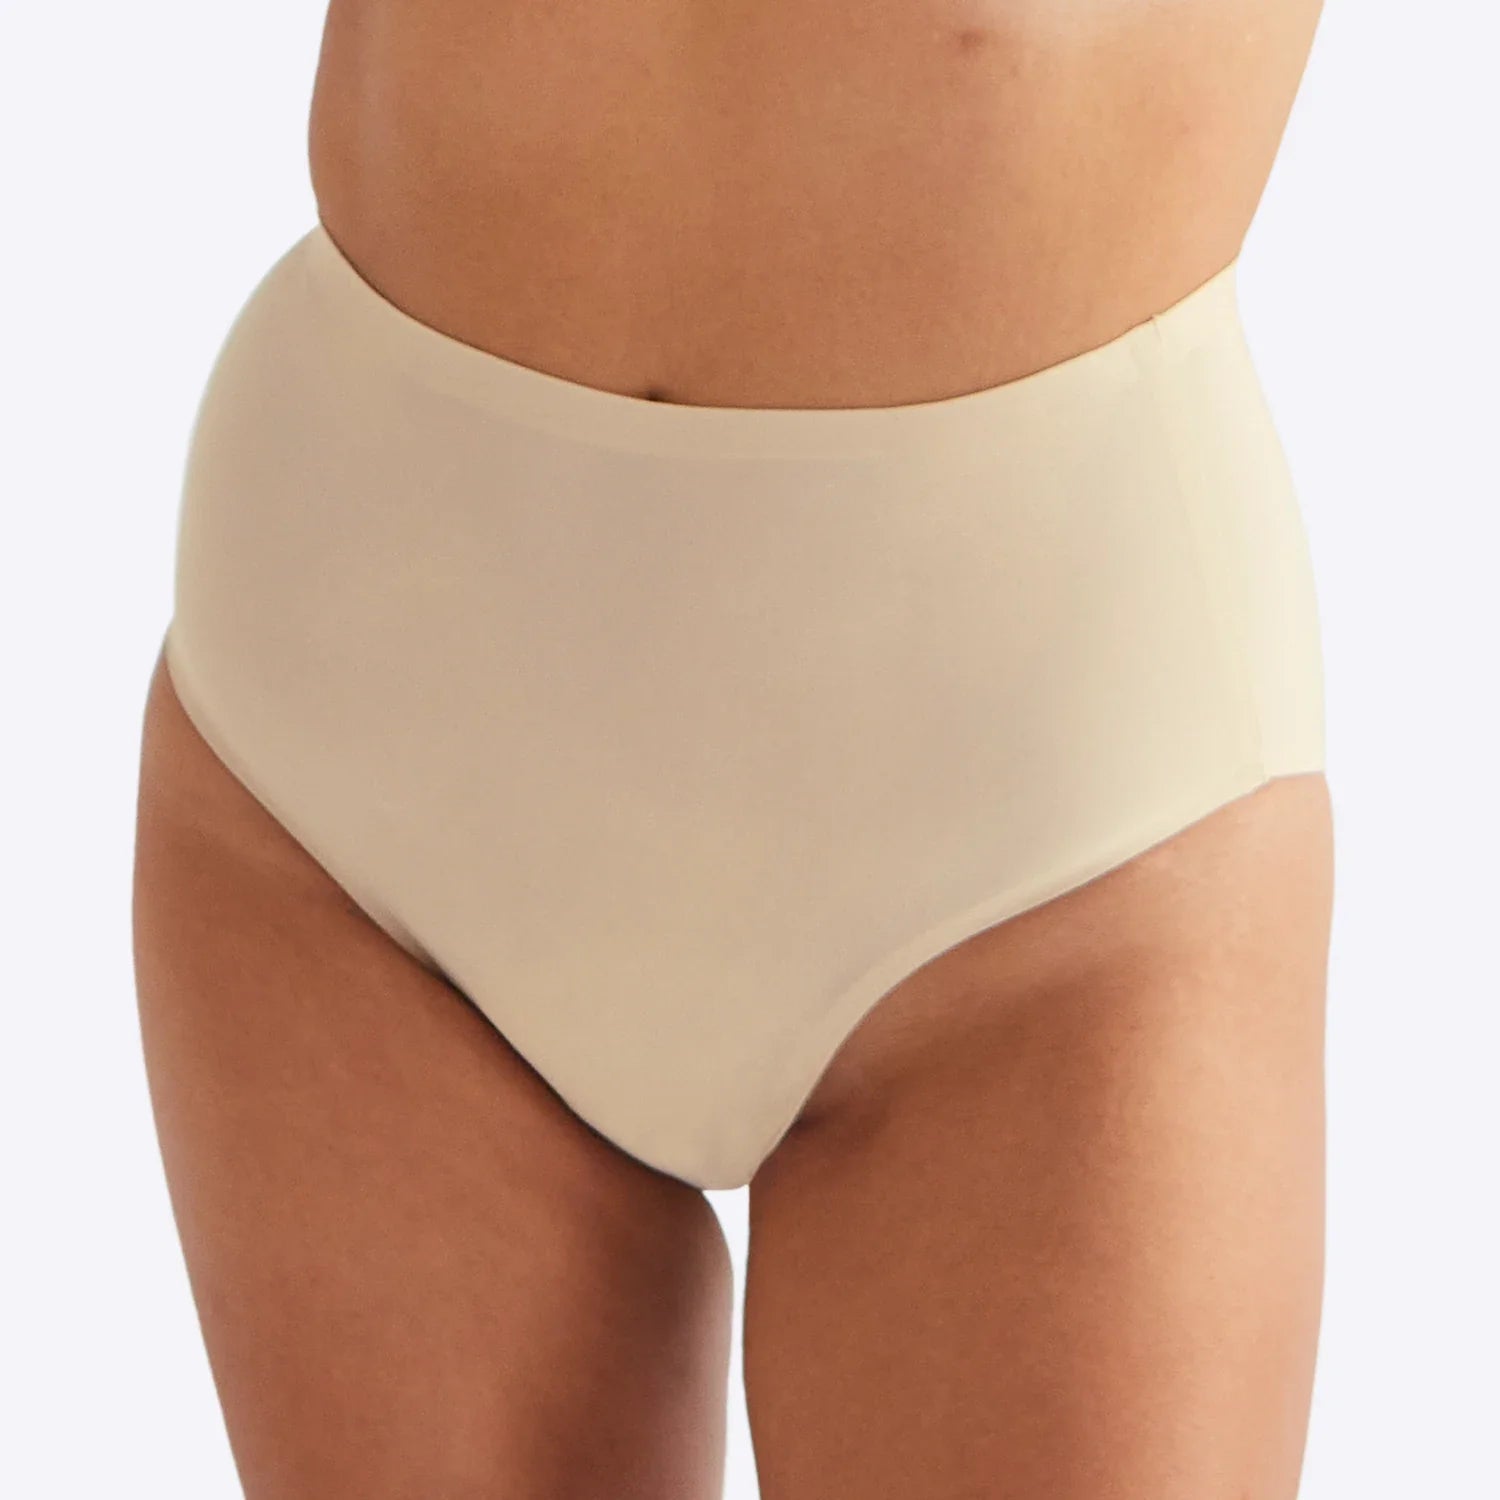 pee proof underwear for light incontinence